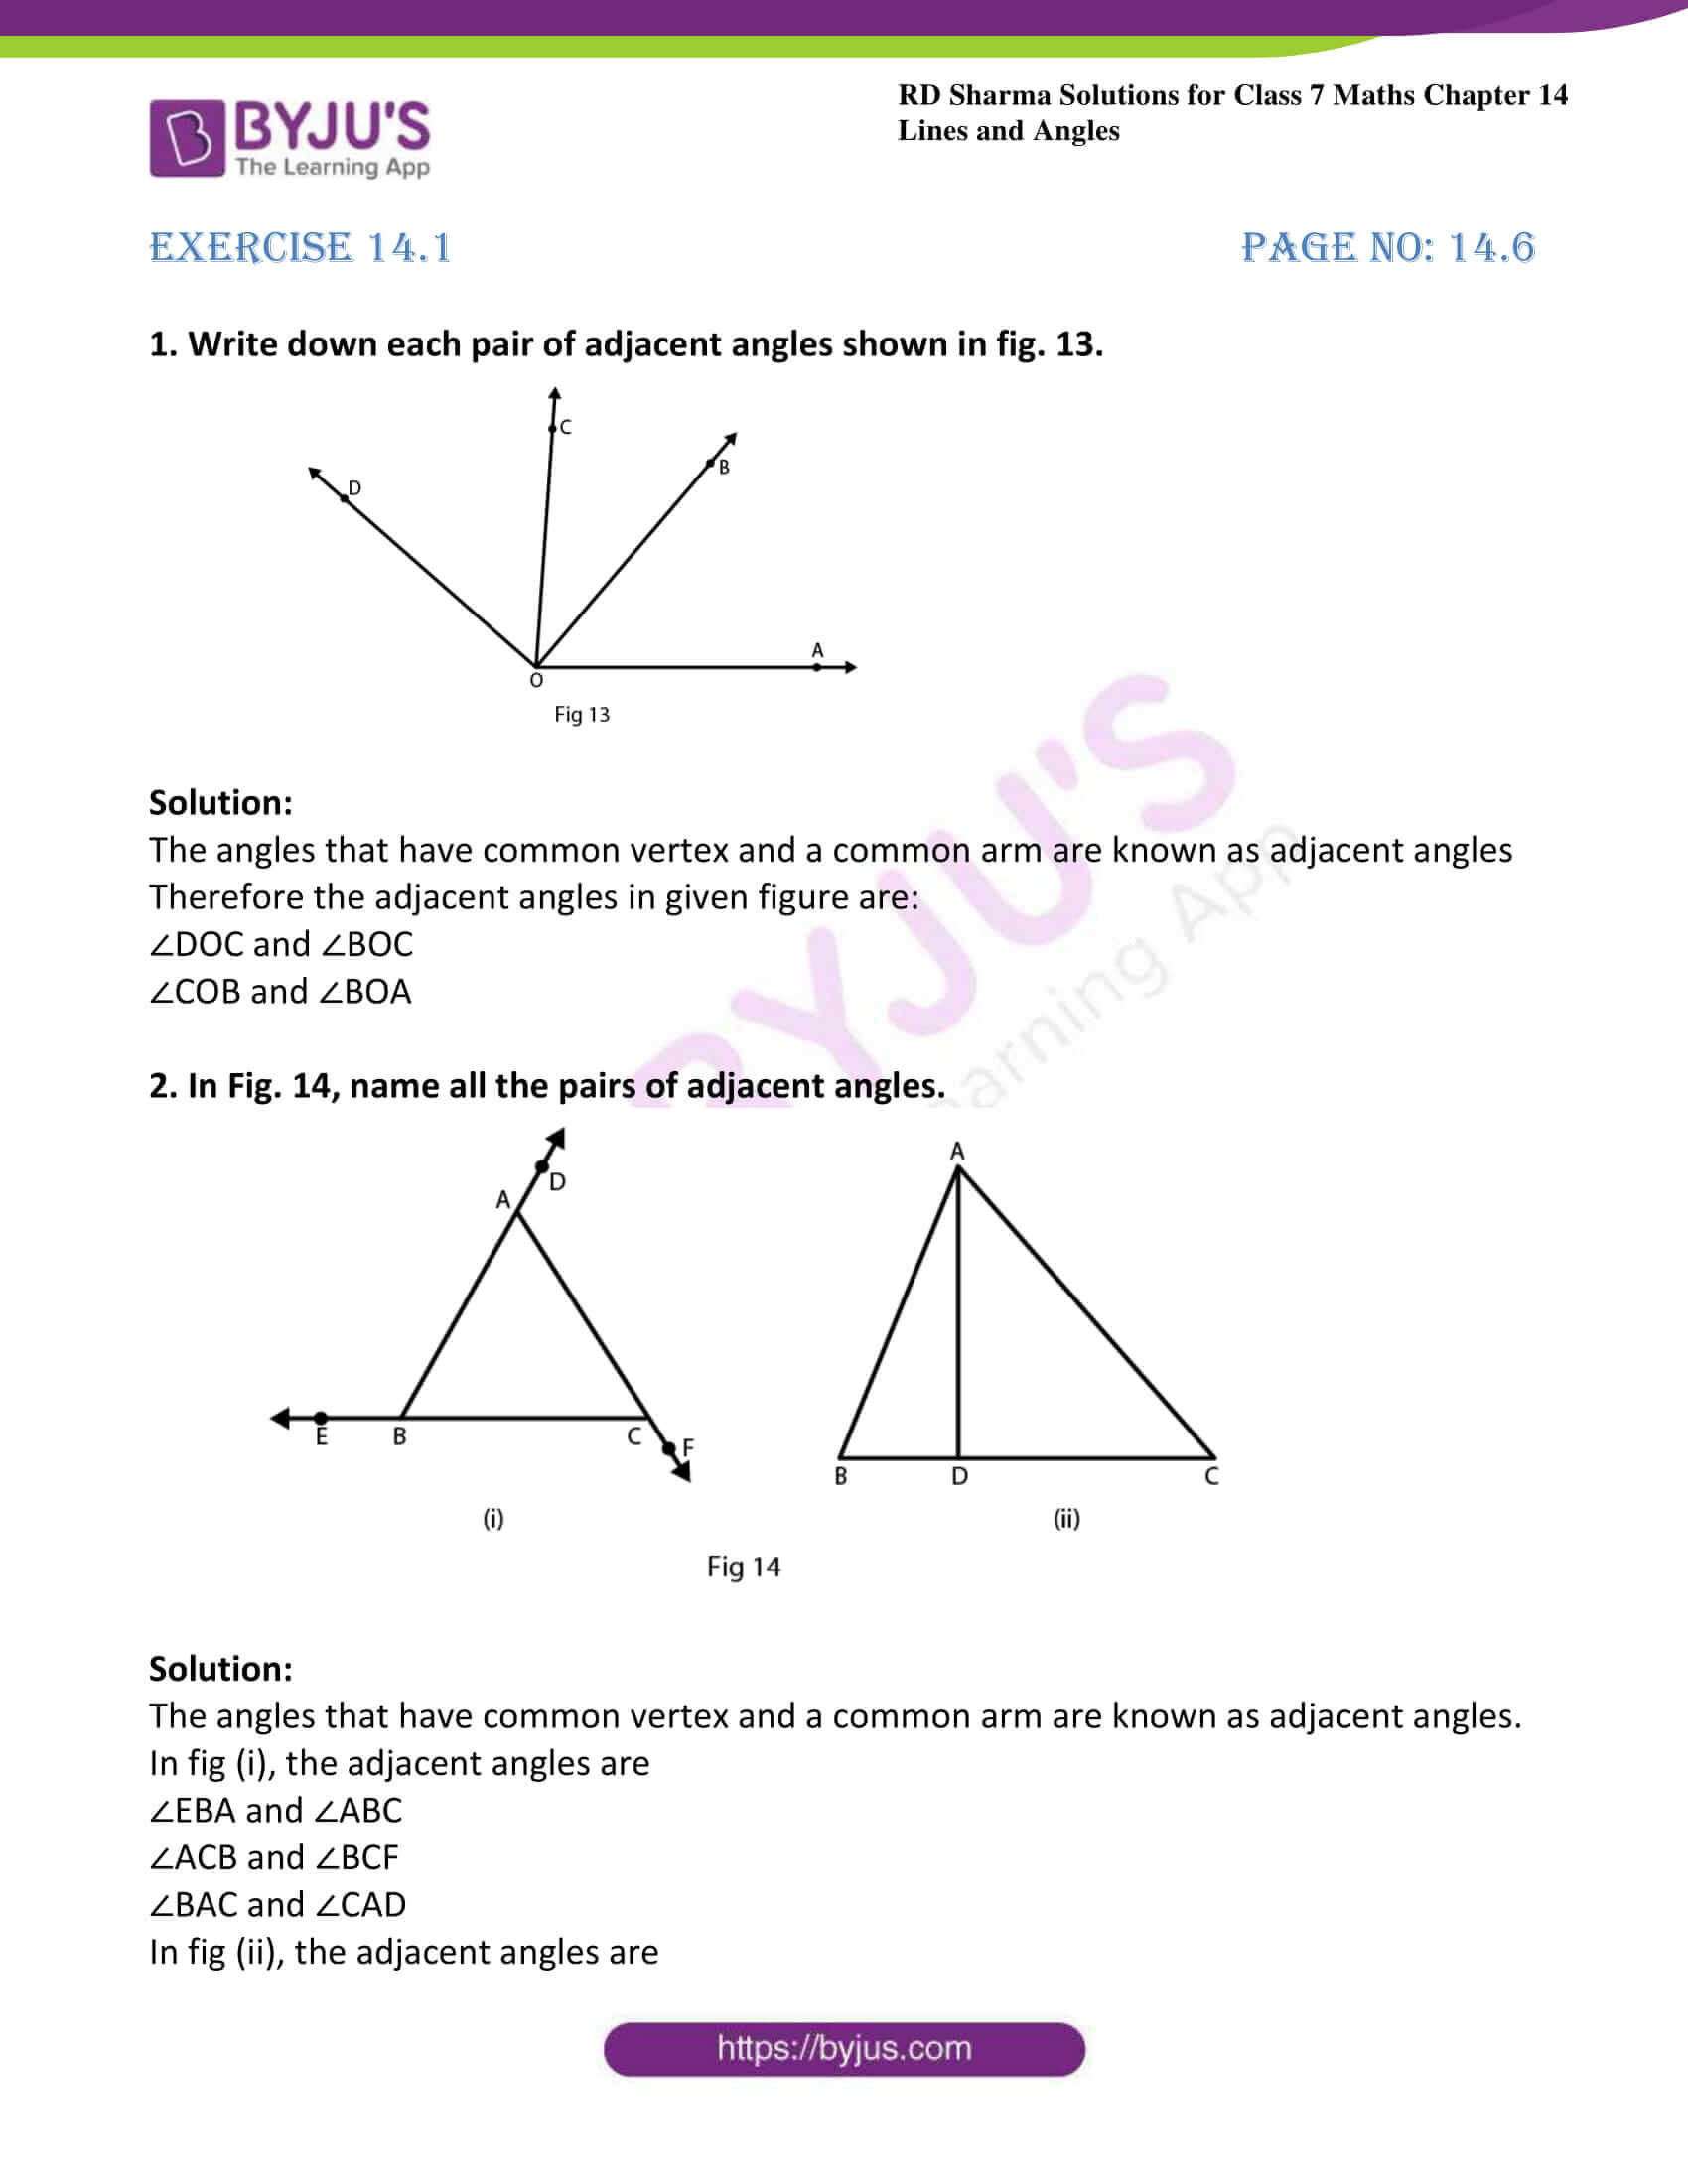 Triangle Angle Sum Worksheet Rd Sharma solutions for Class 7 Maths Chapter 14 Lines and